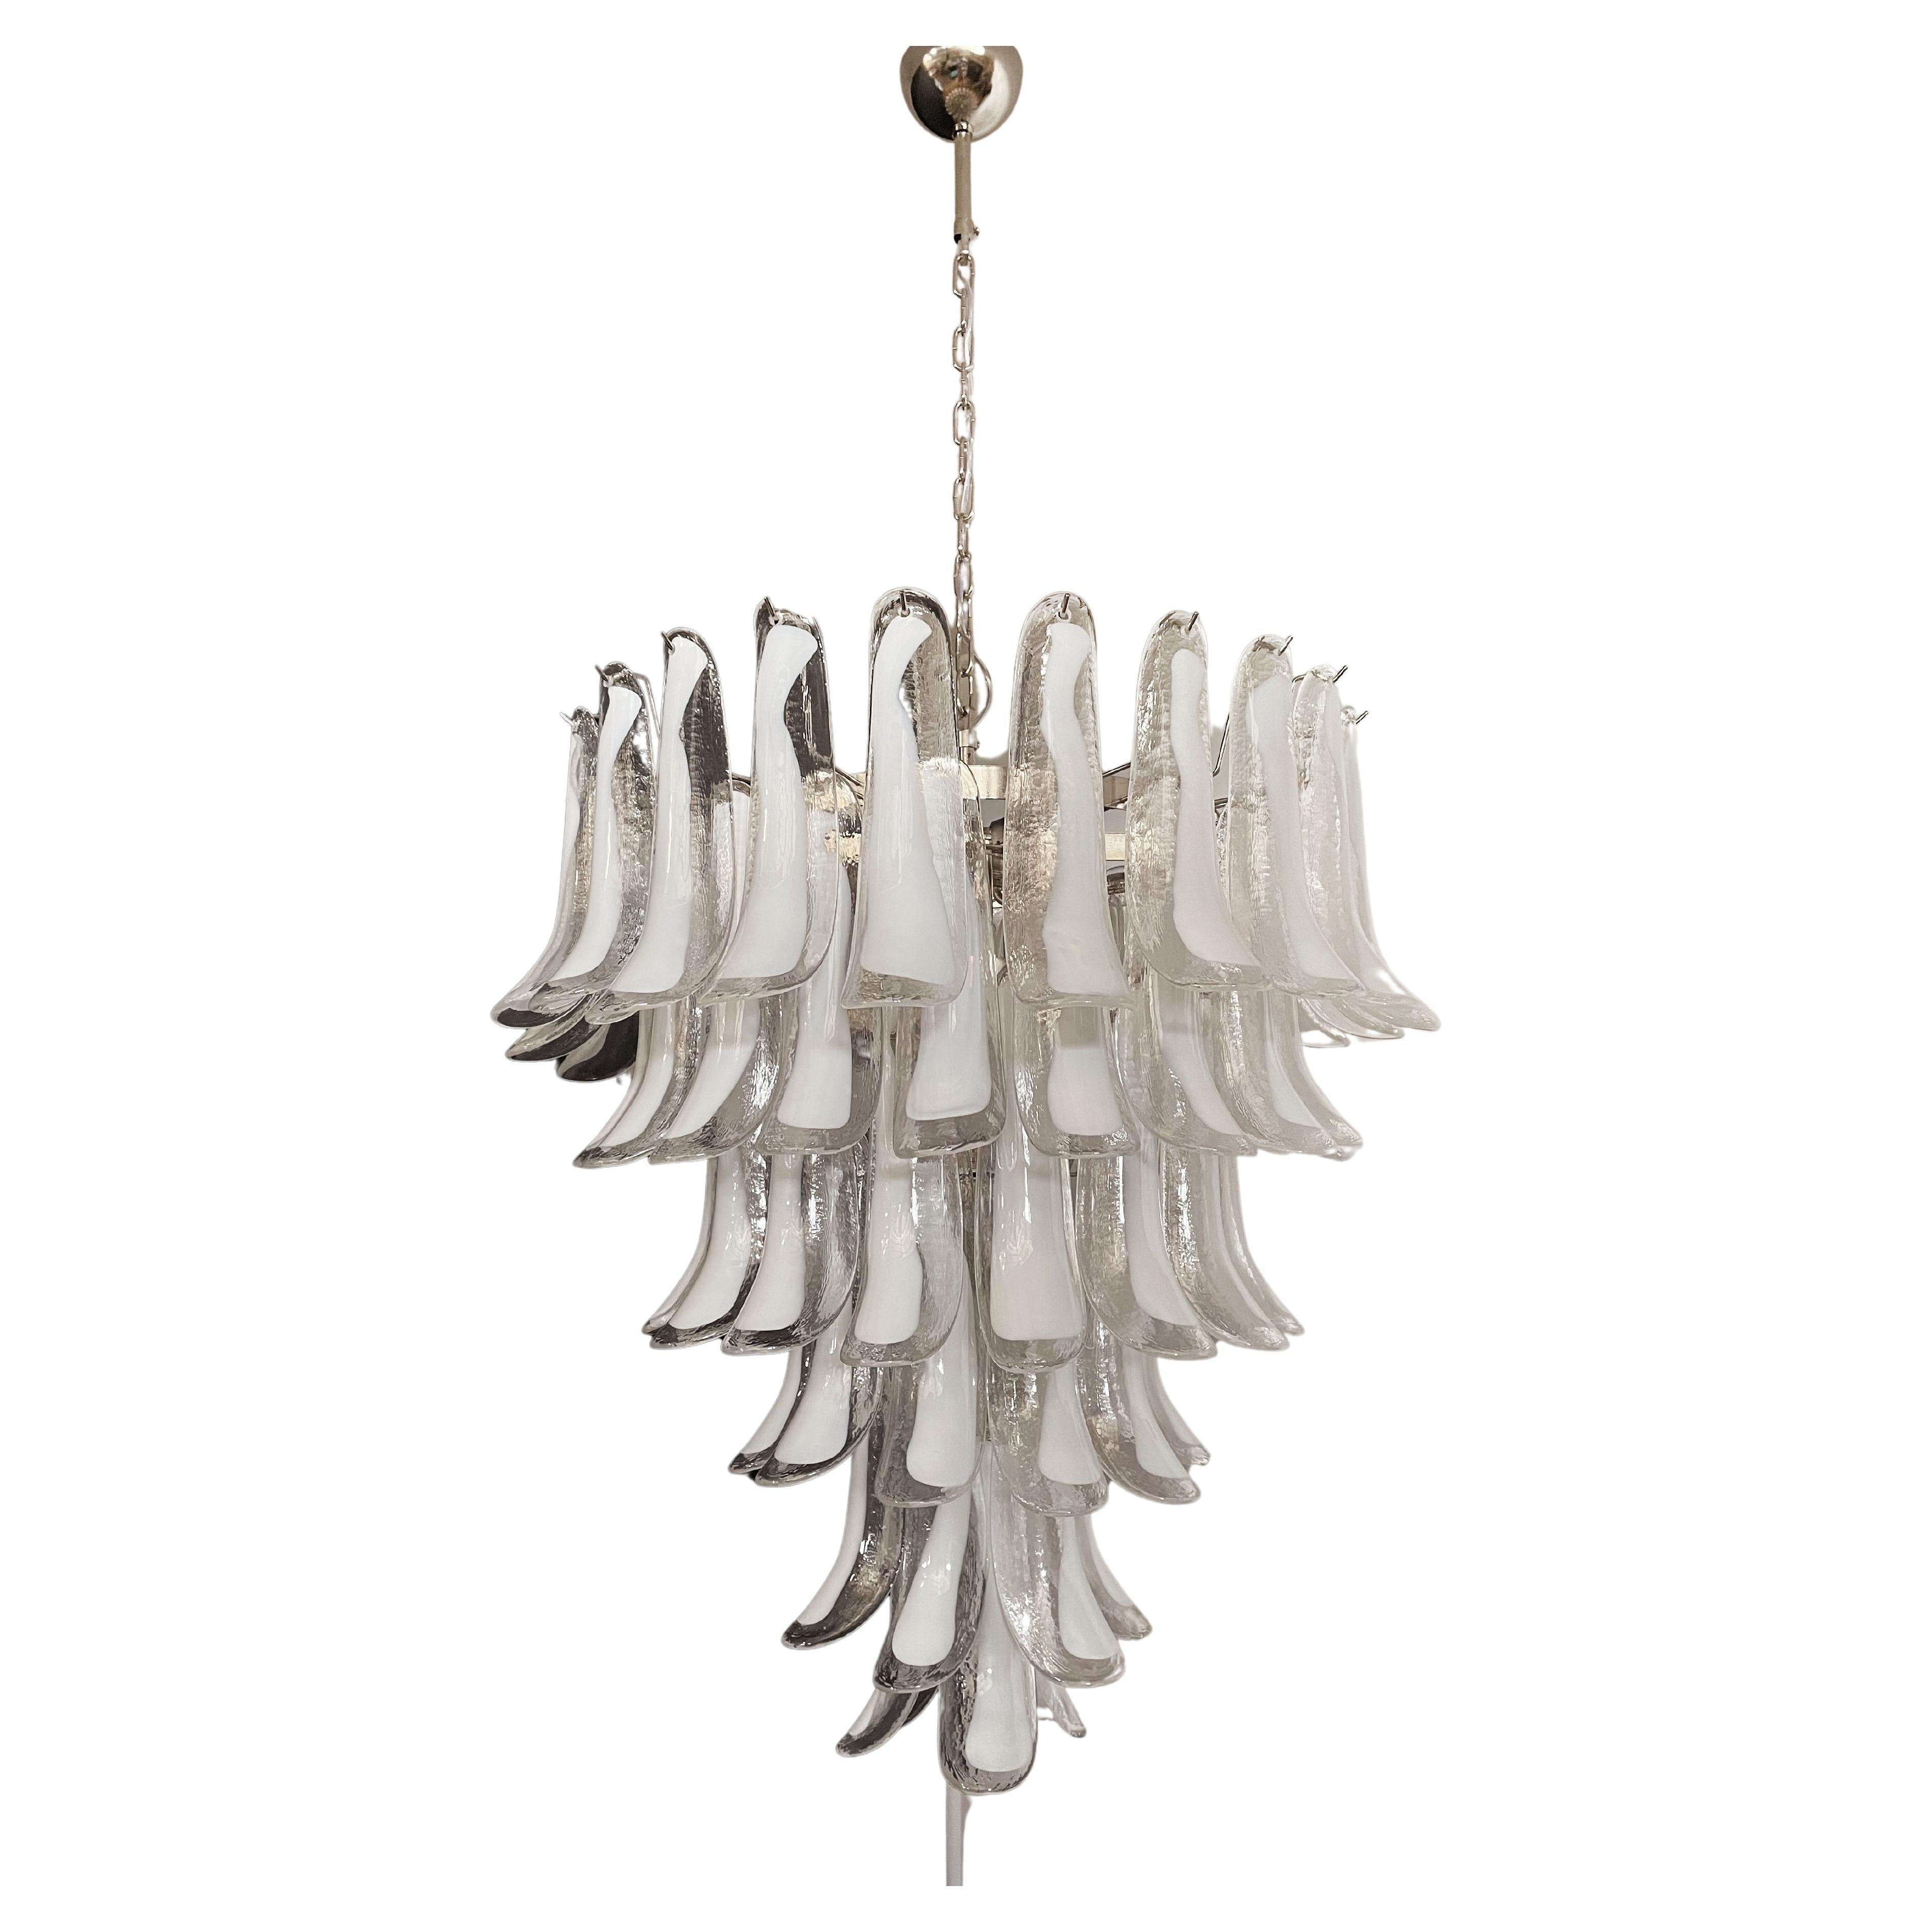 Italian vintage Murano chandelier in the manner of Mazzega - 75 glass petals For Sale